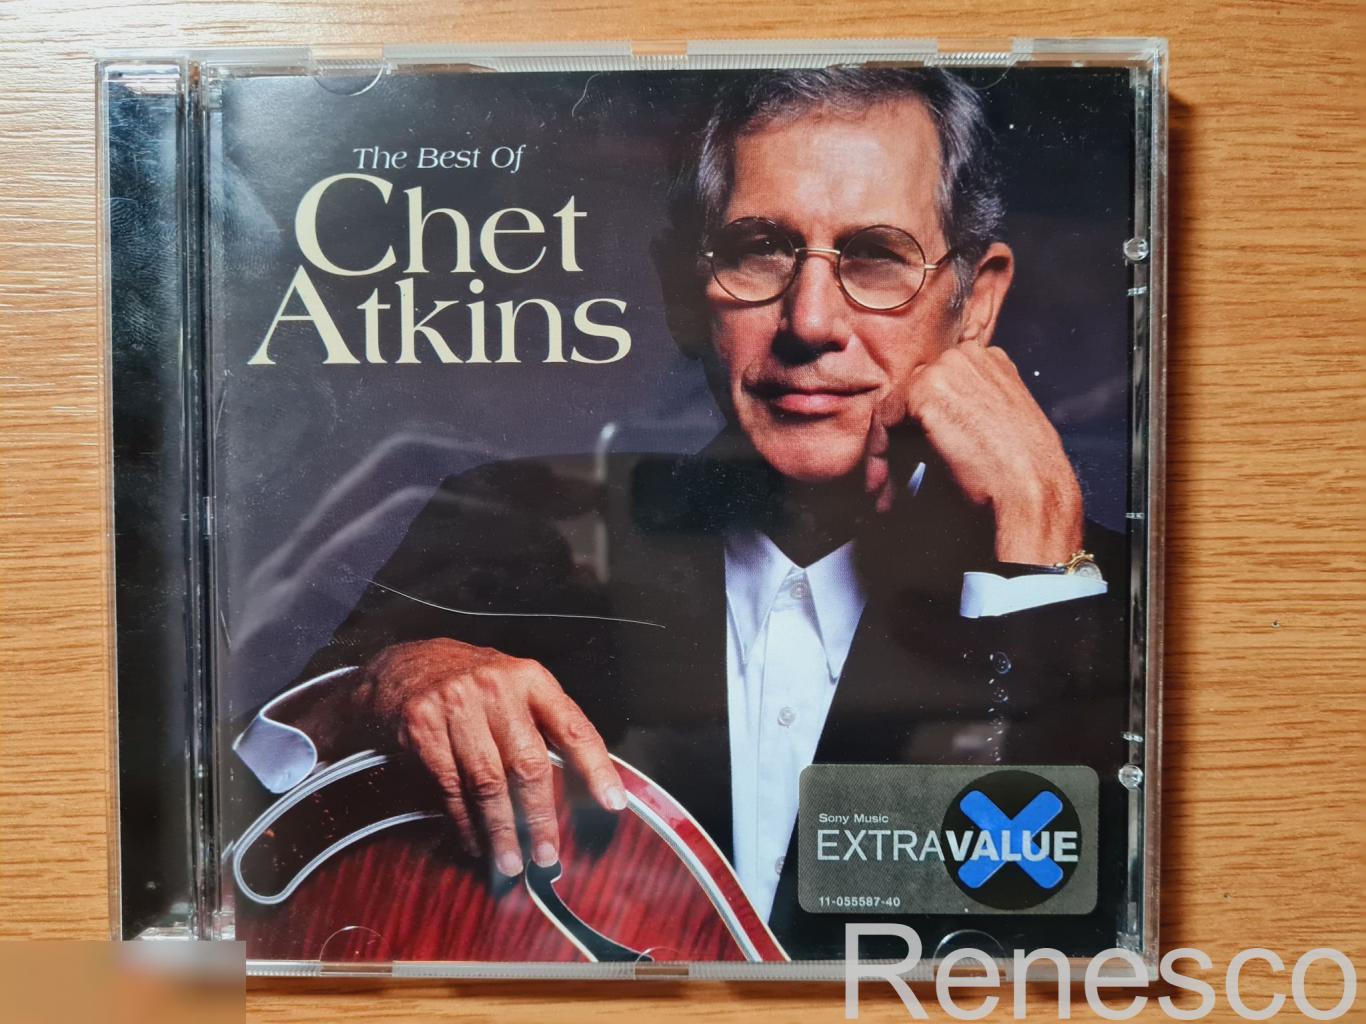 Chet Atkins ?– The Best Of Chet Atkins (Europe) (2001)